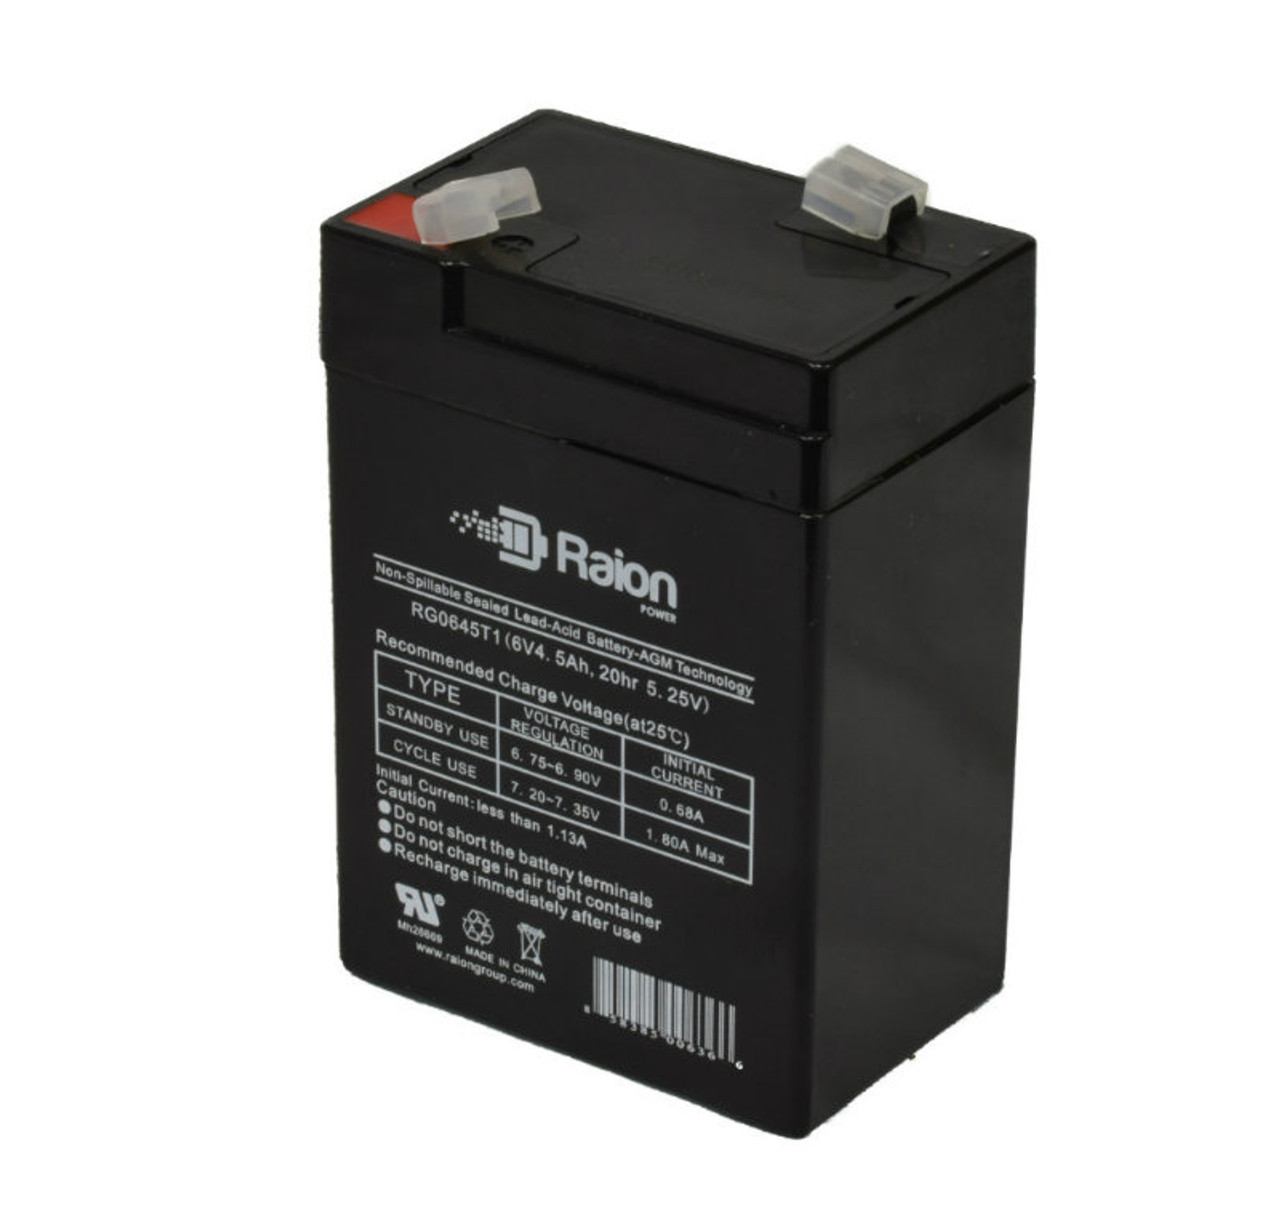 Raion Power RG0645T1 6V 4.5Ah Replacement Battery Cartridge for Long Way LW-3FM5